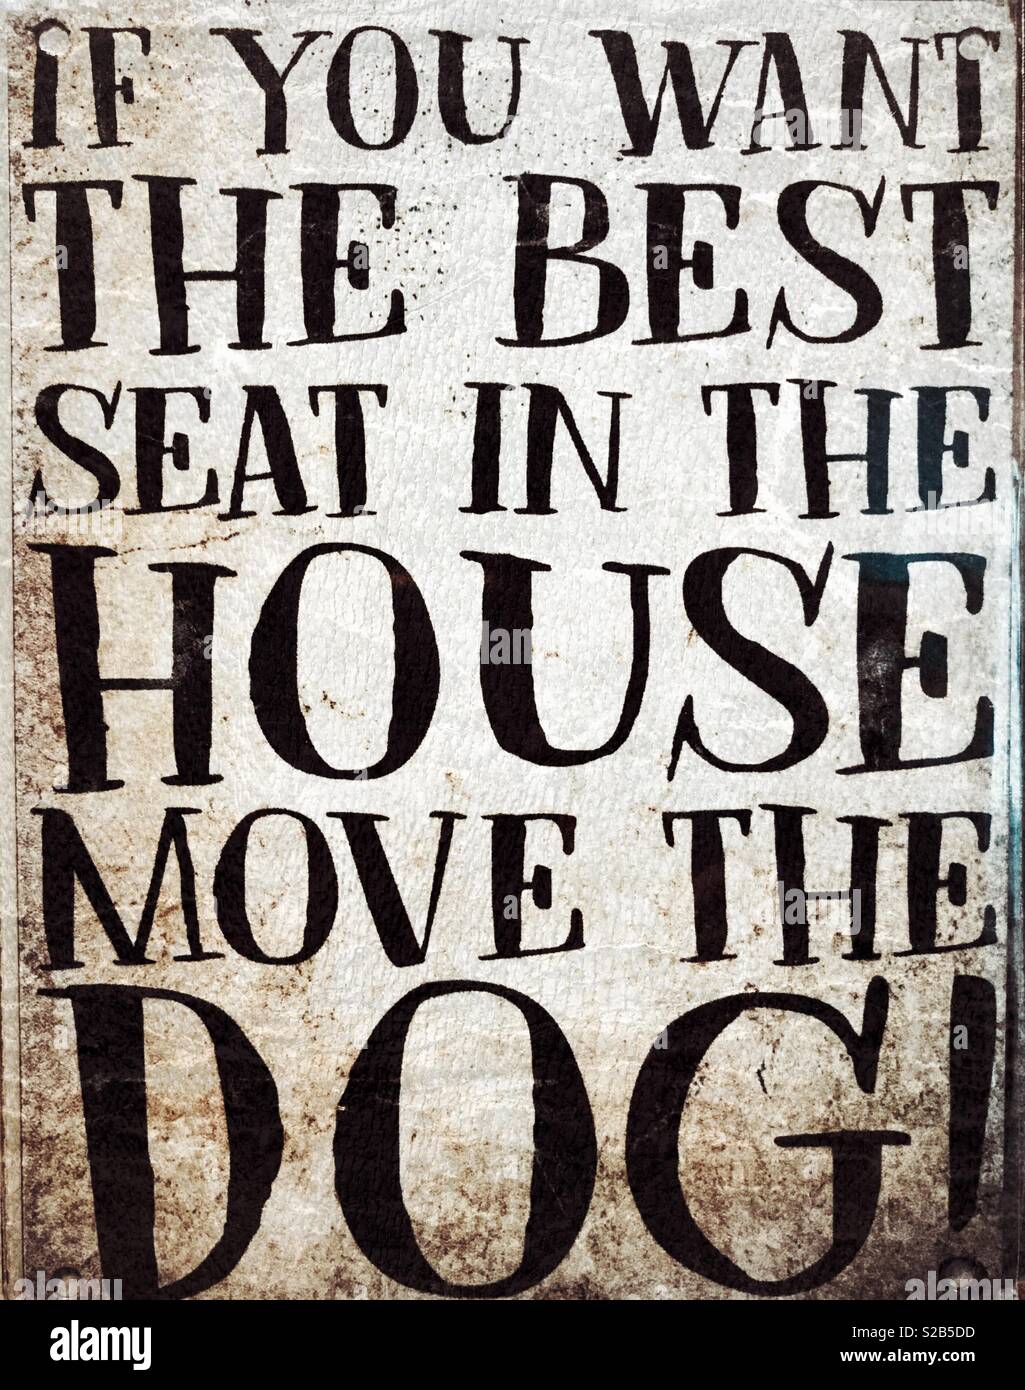 Humour. If you want the best seat in the house move the dog Stock Photo